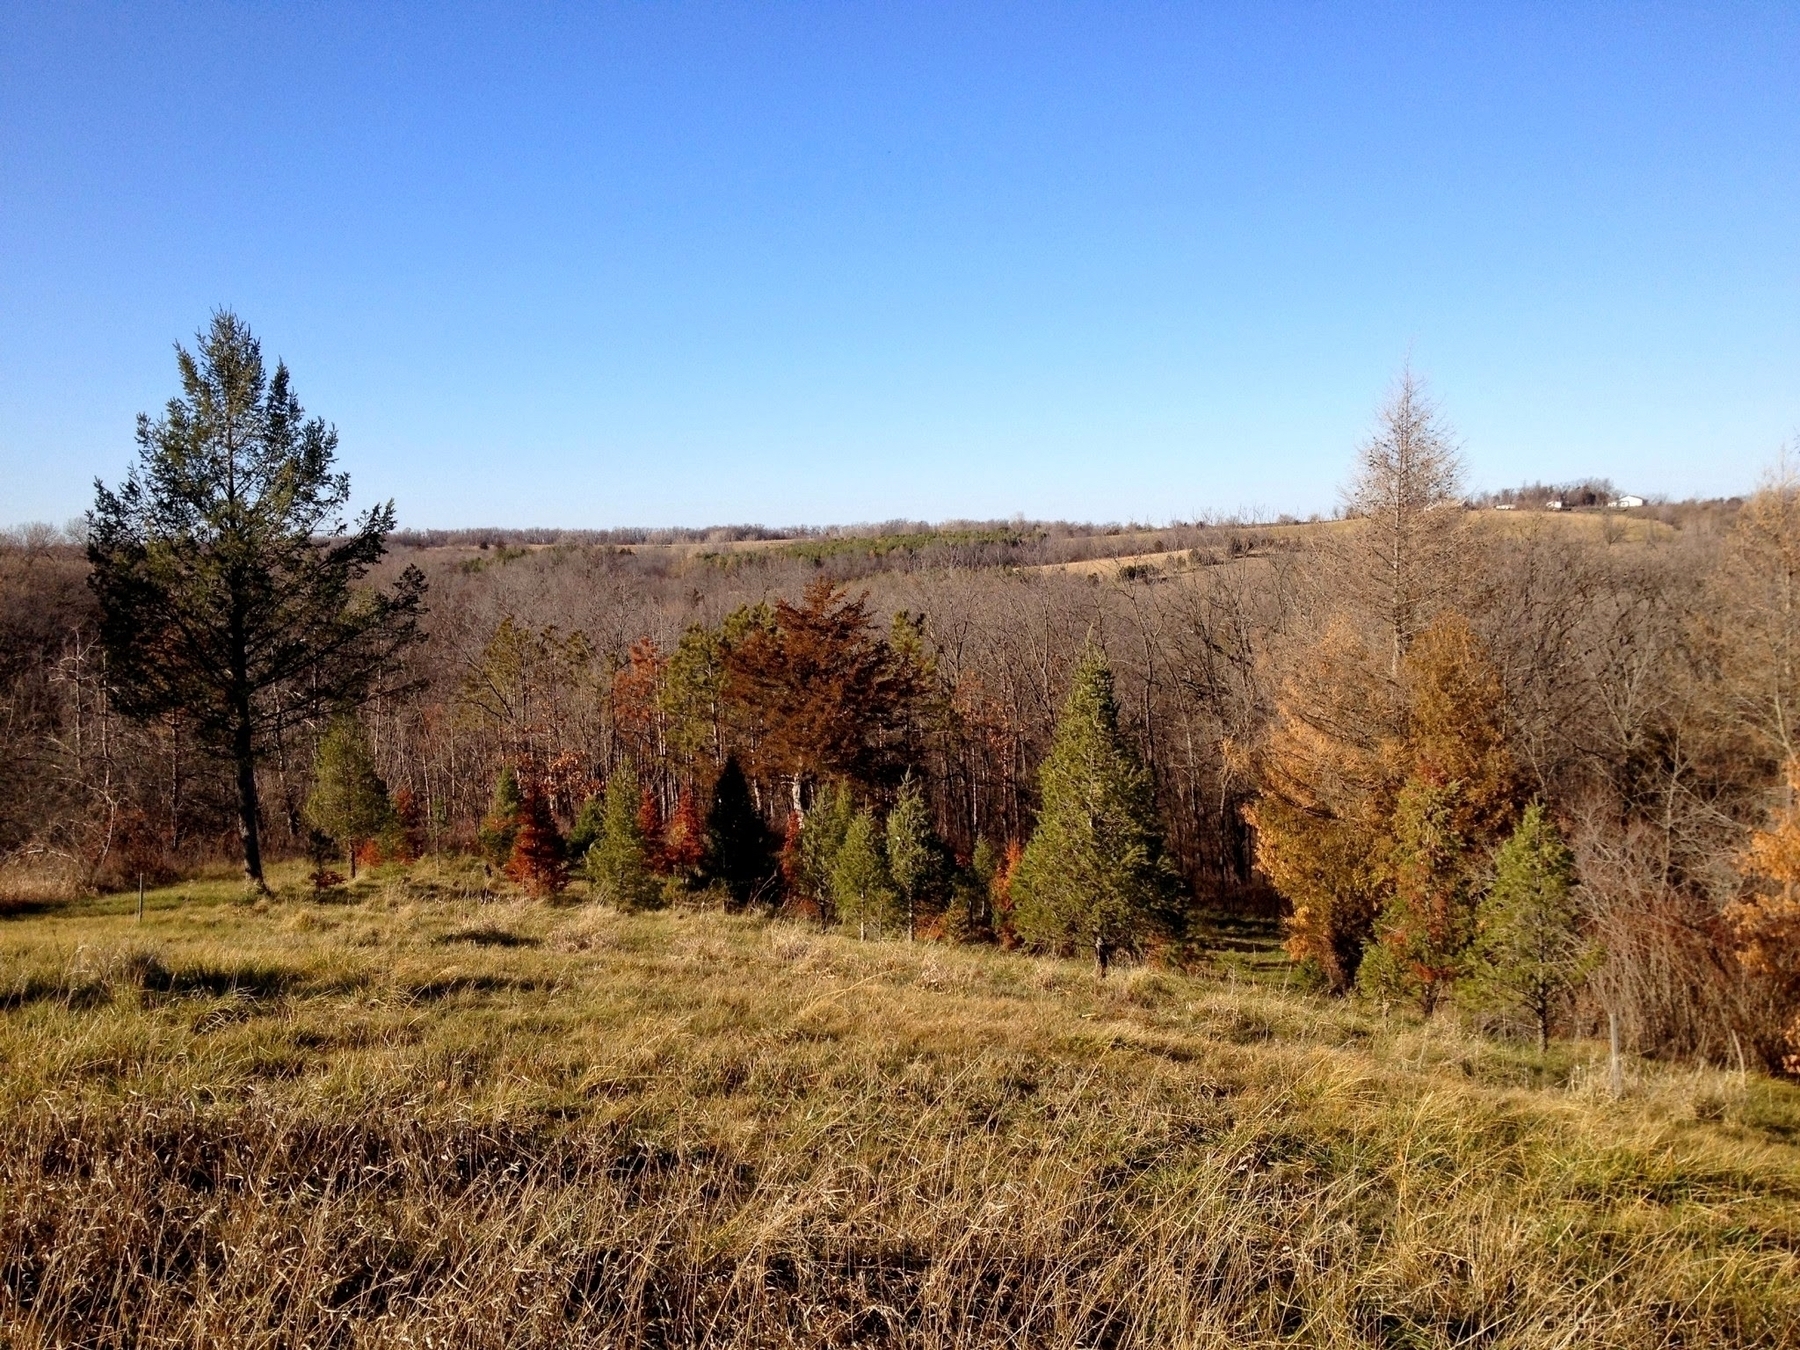 A variety of trees with autumn foliage stand before a grassy field under a clear blue sky.